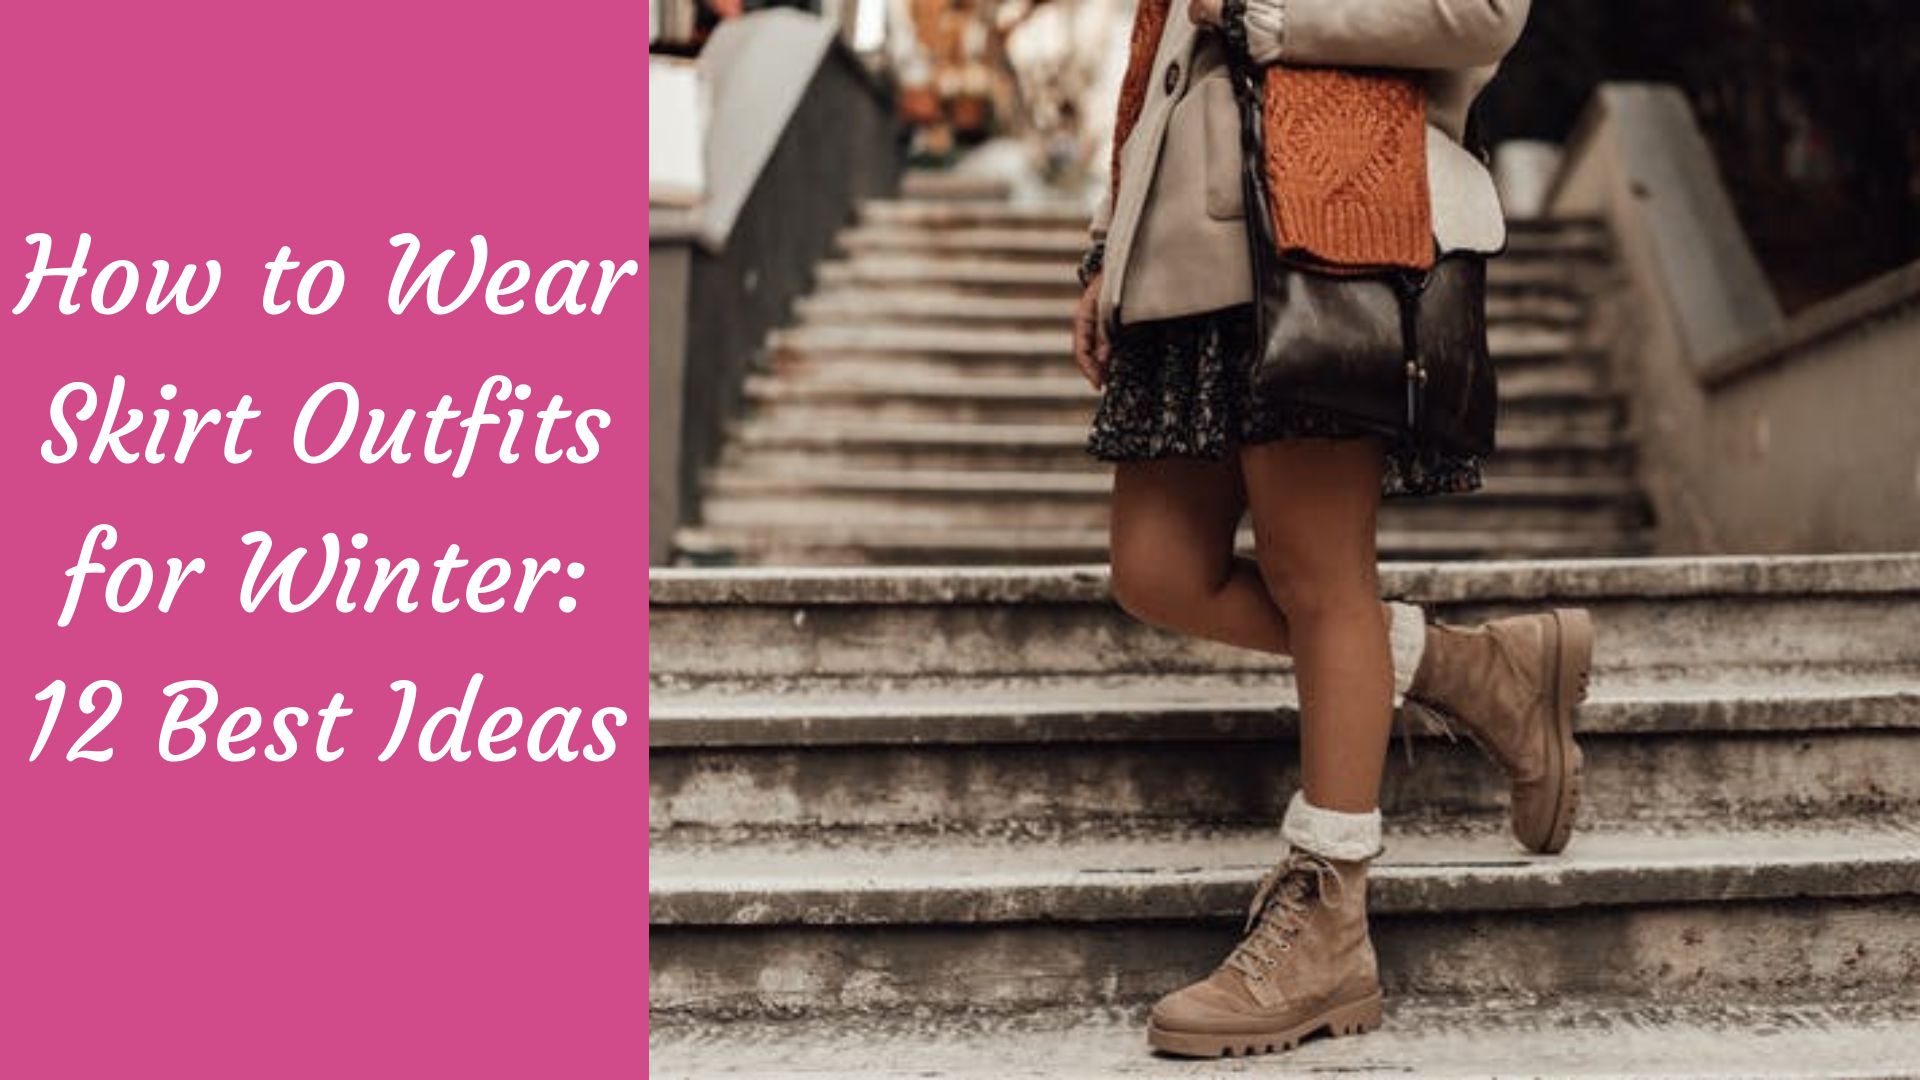 How to Wear Skirt Outfits for Winter: 12 Best Ideas - The Kosha Journal